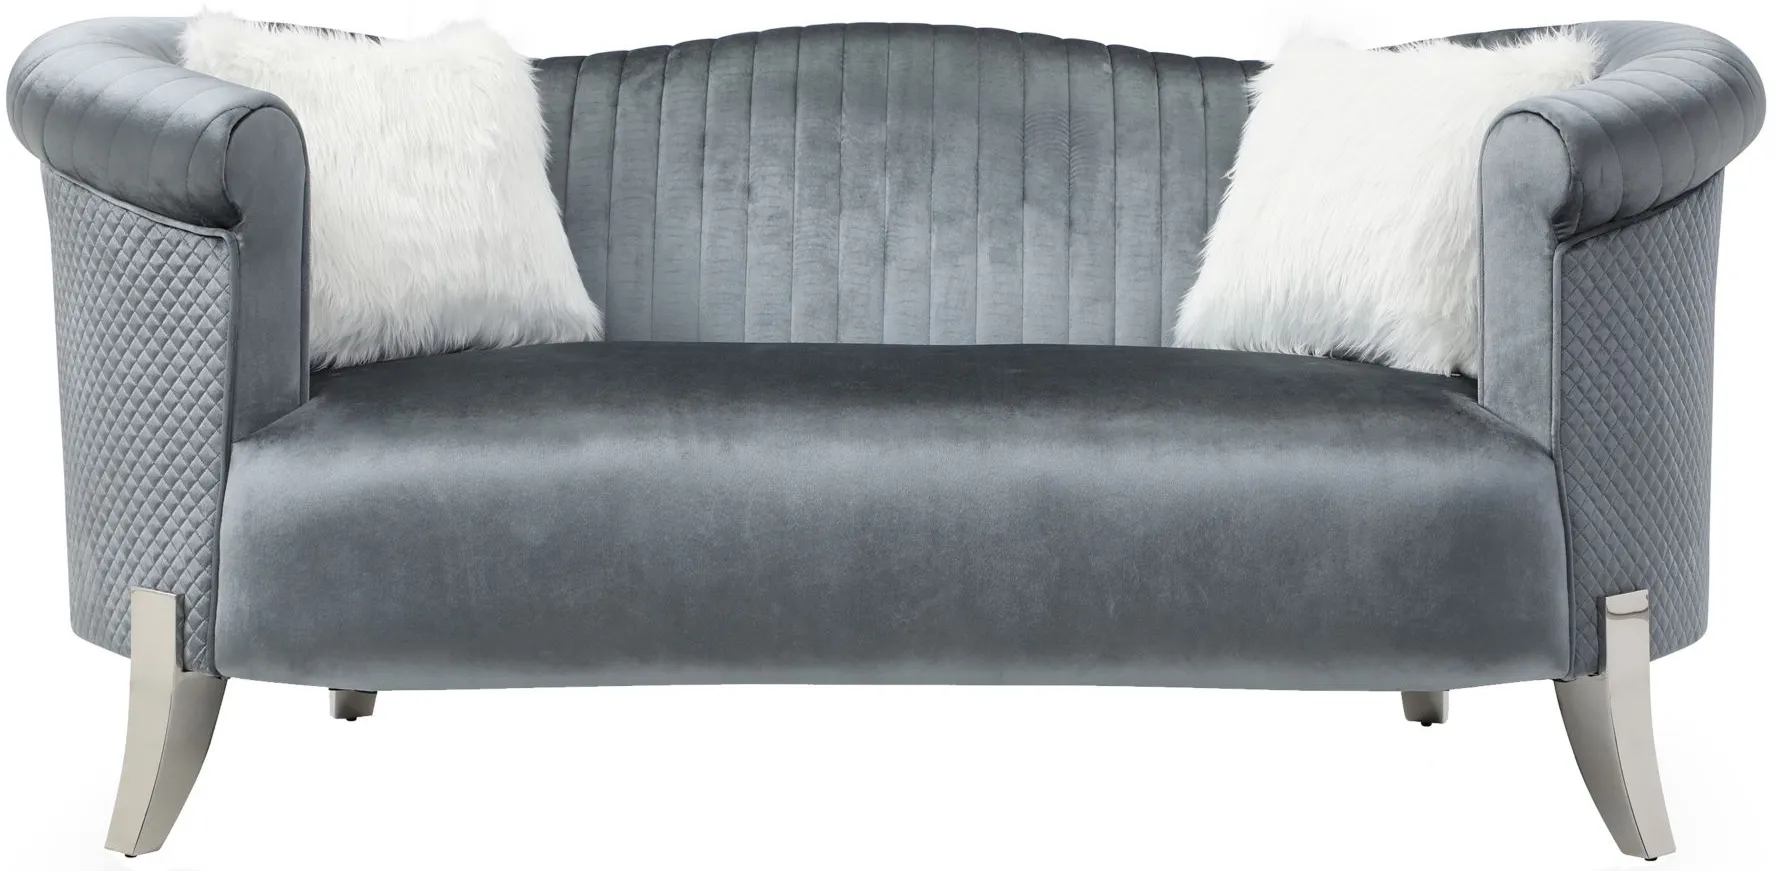 Vine Loveseat in Gray by Glory Furniture